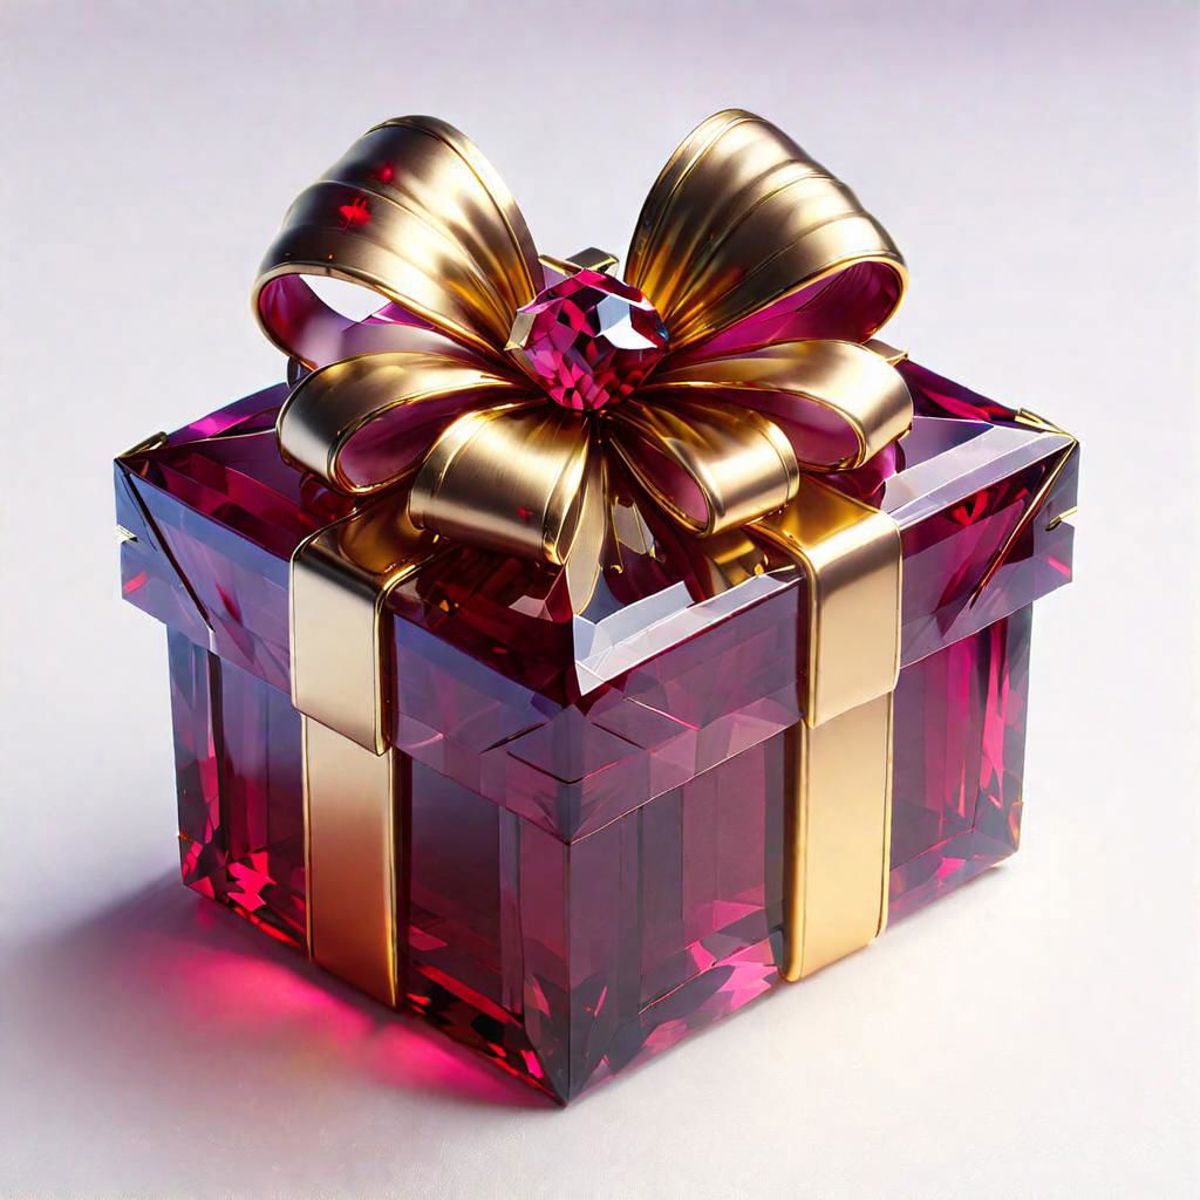 A gold and pink gift box with a bow on top.